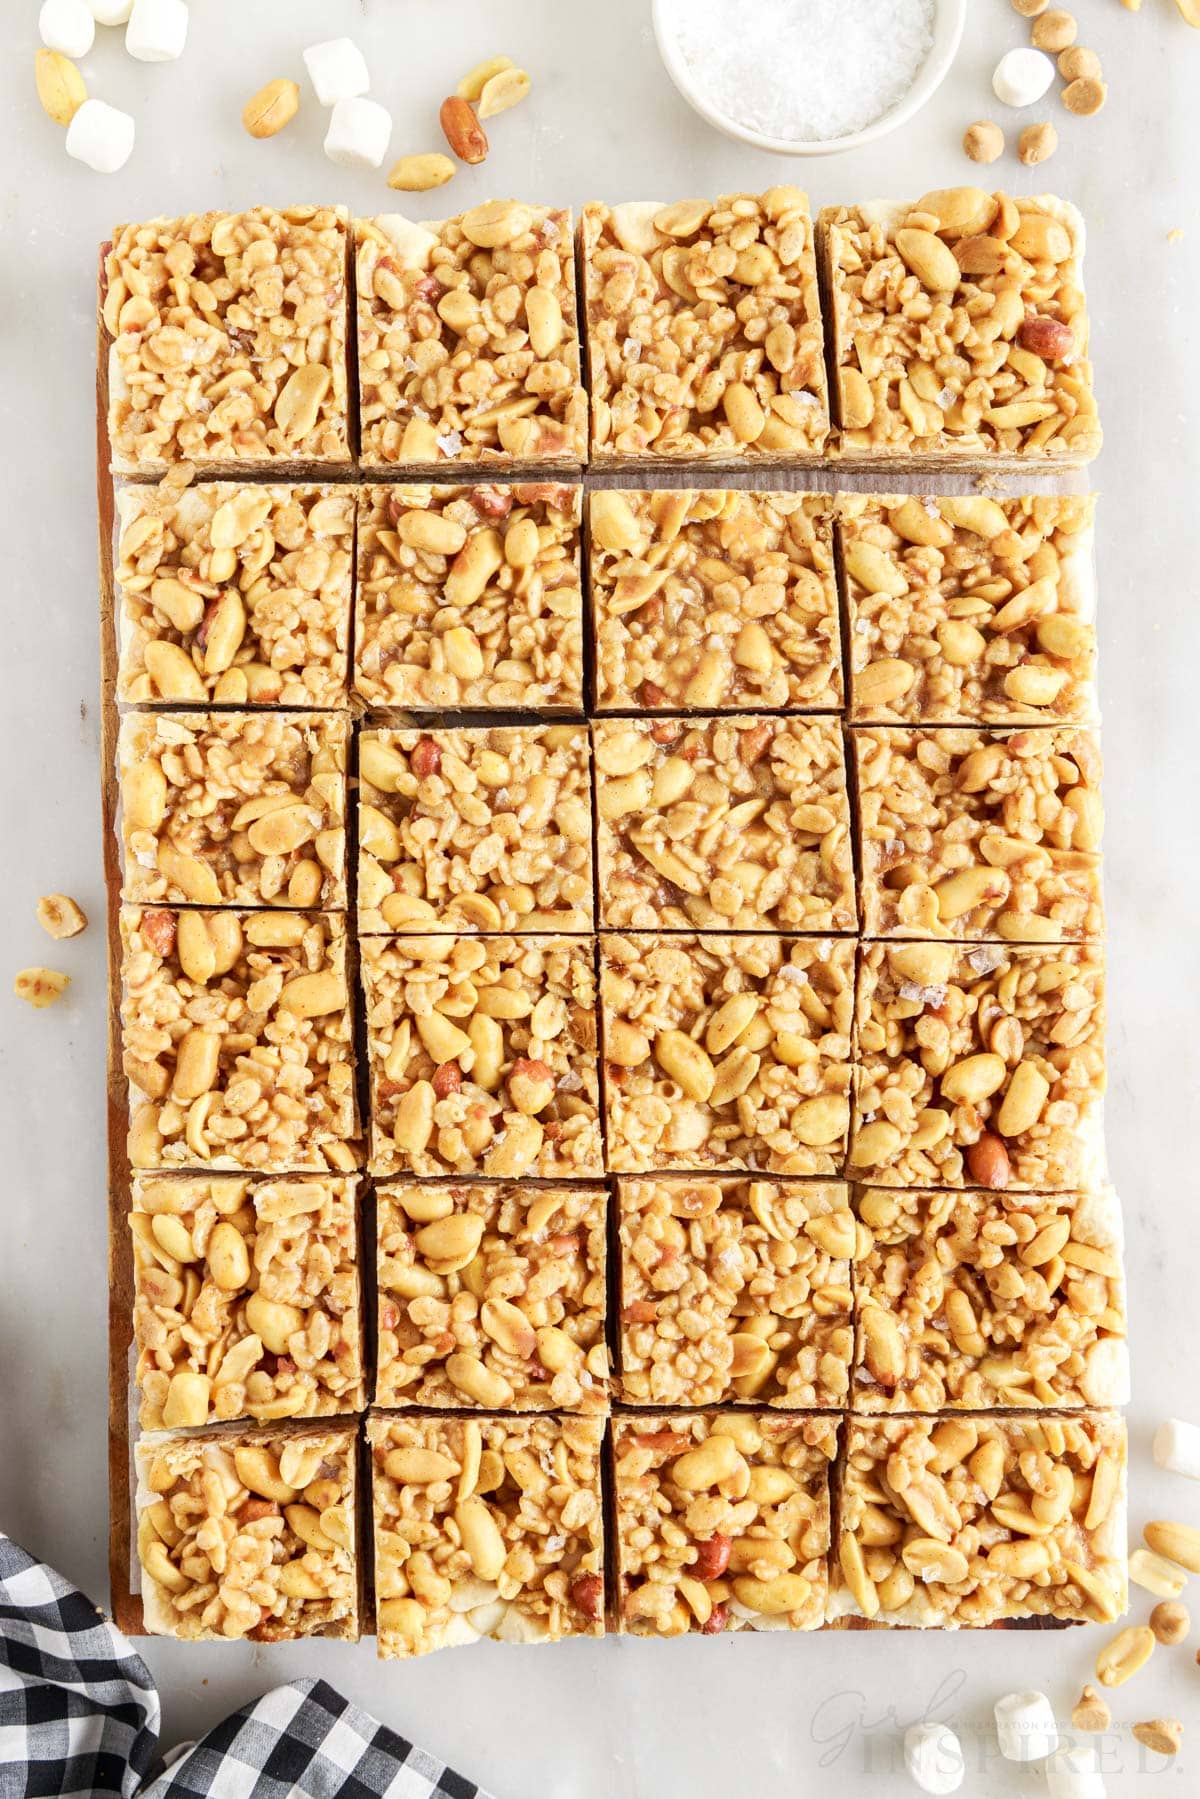 Salted Nut Roll Bars cut into squares on a cutting board.